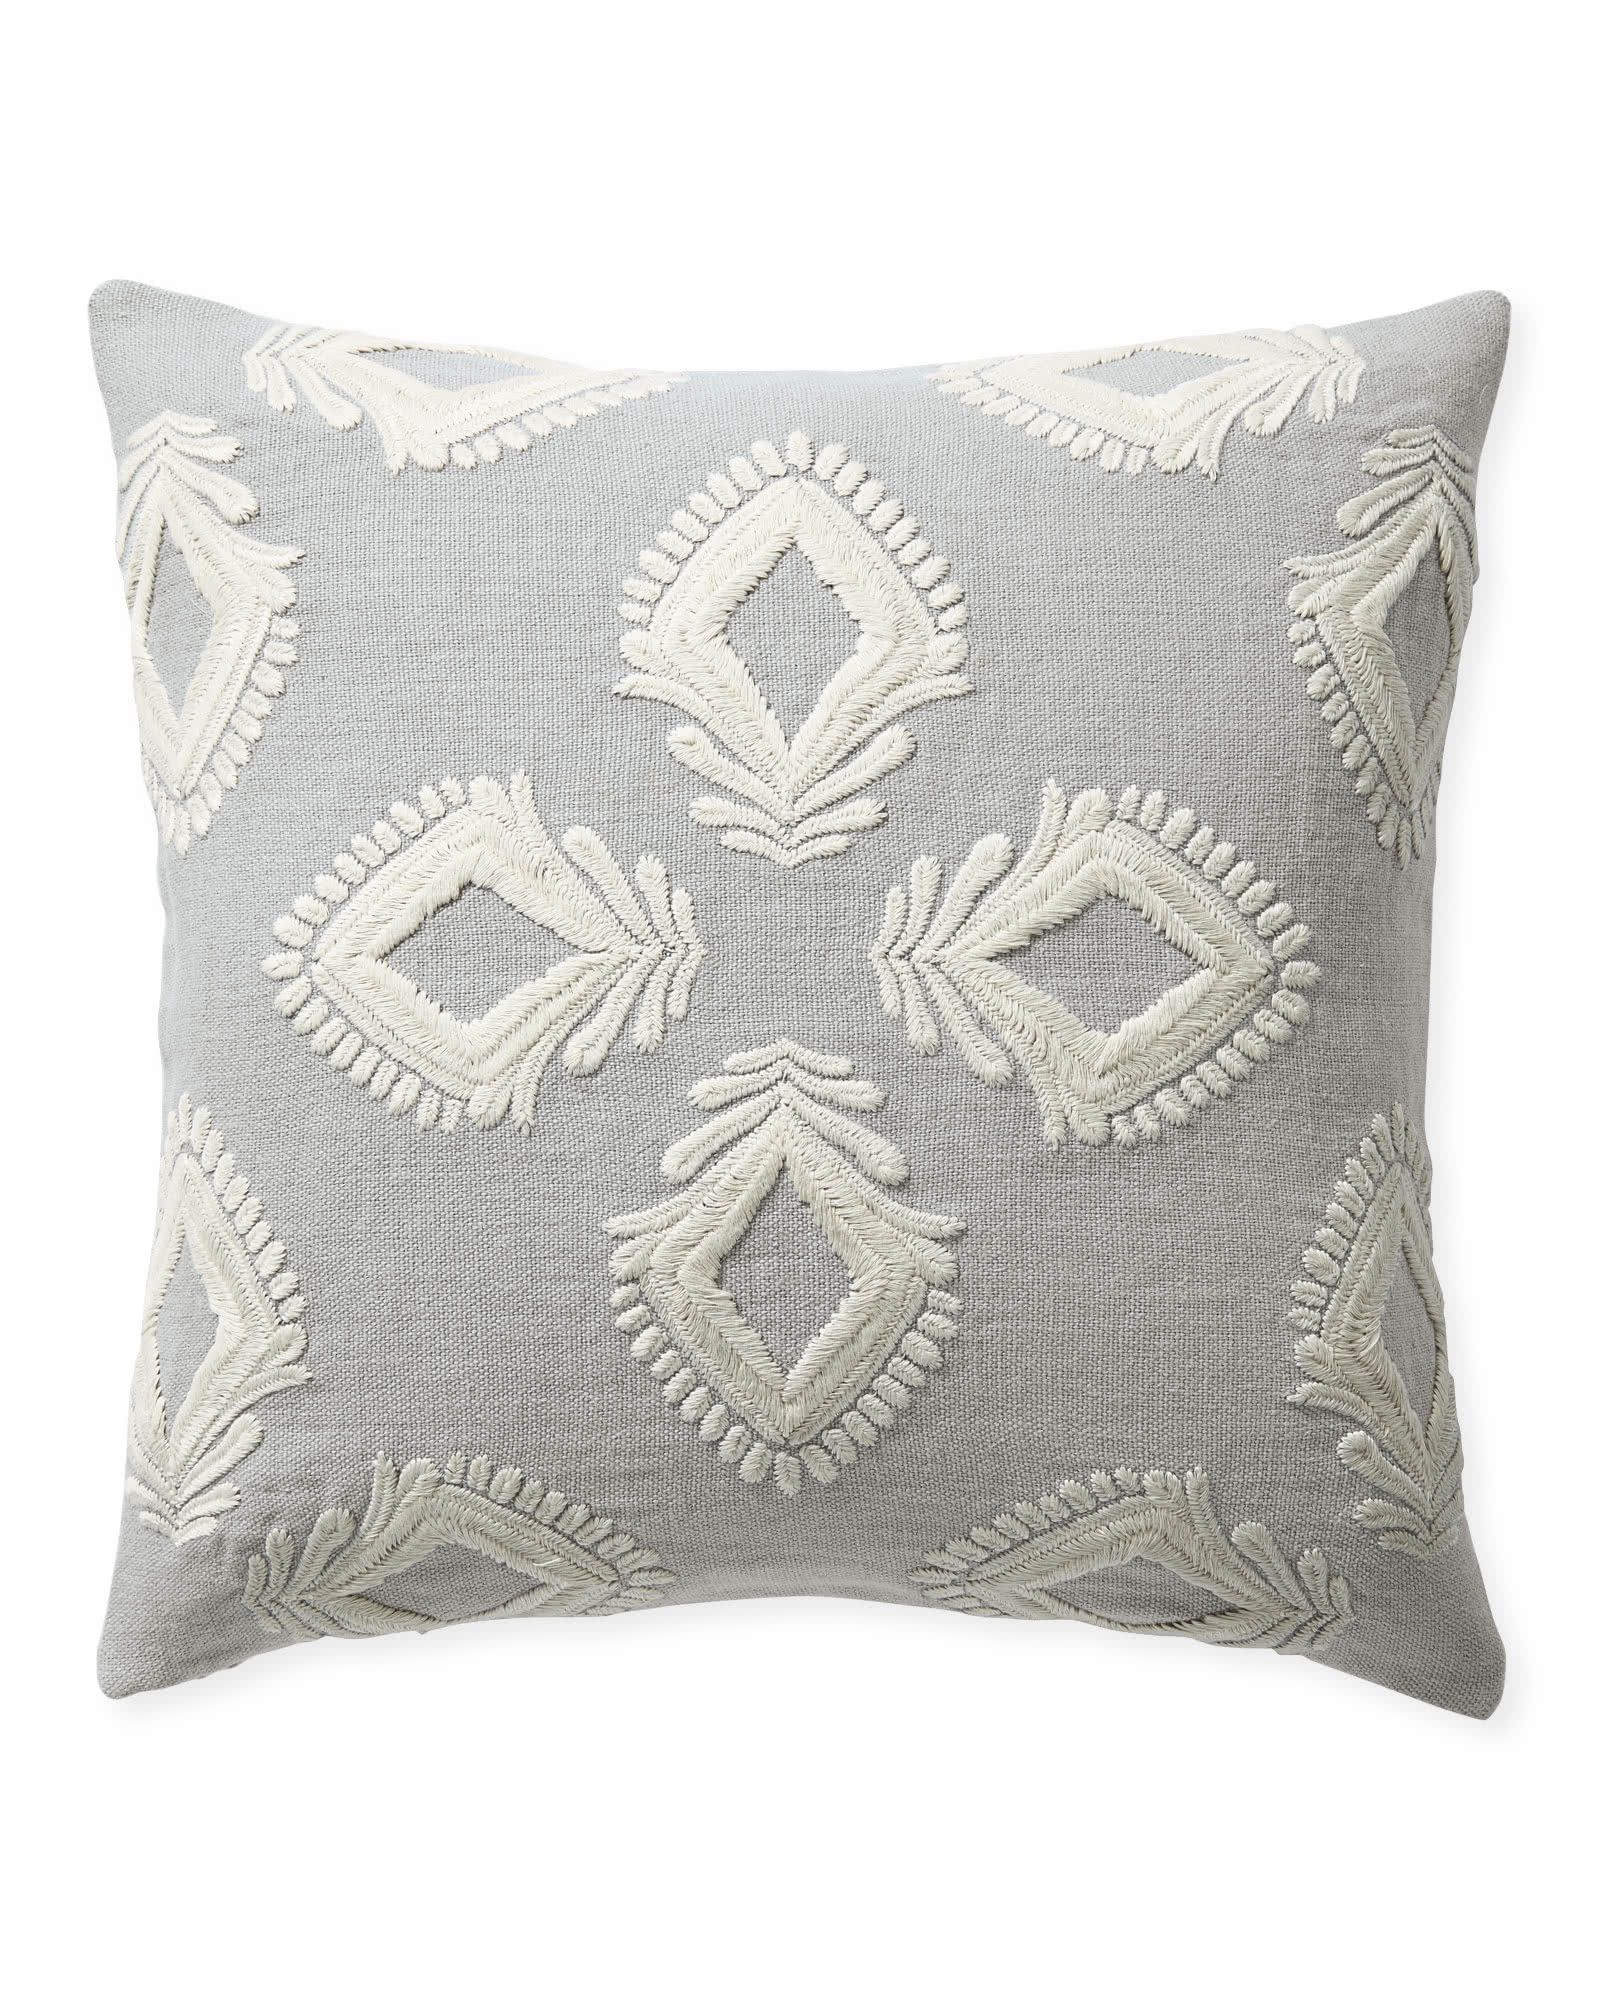 Leighton Pillow Cover
        D08S-DP239-2424 | Serena and Lily